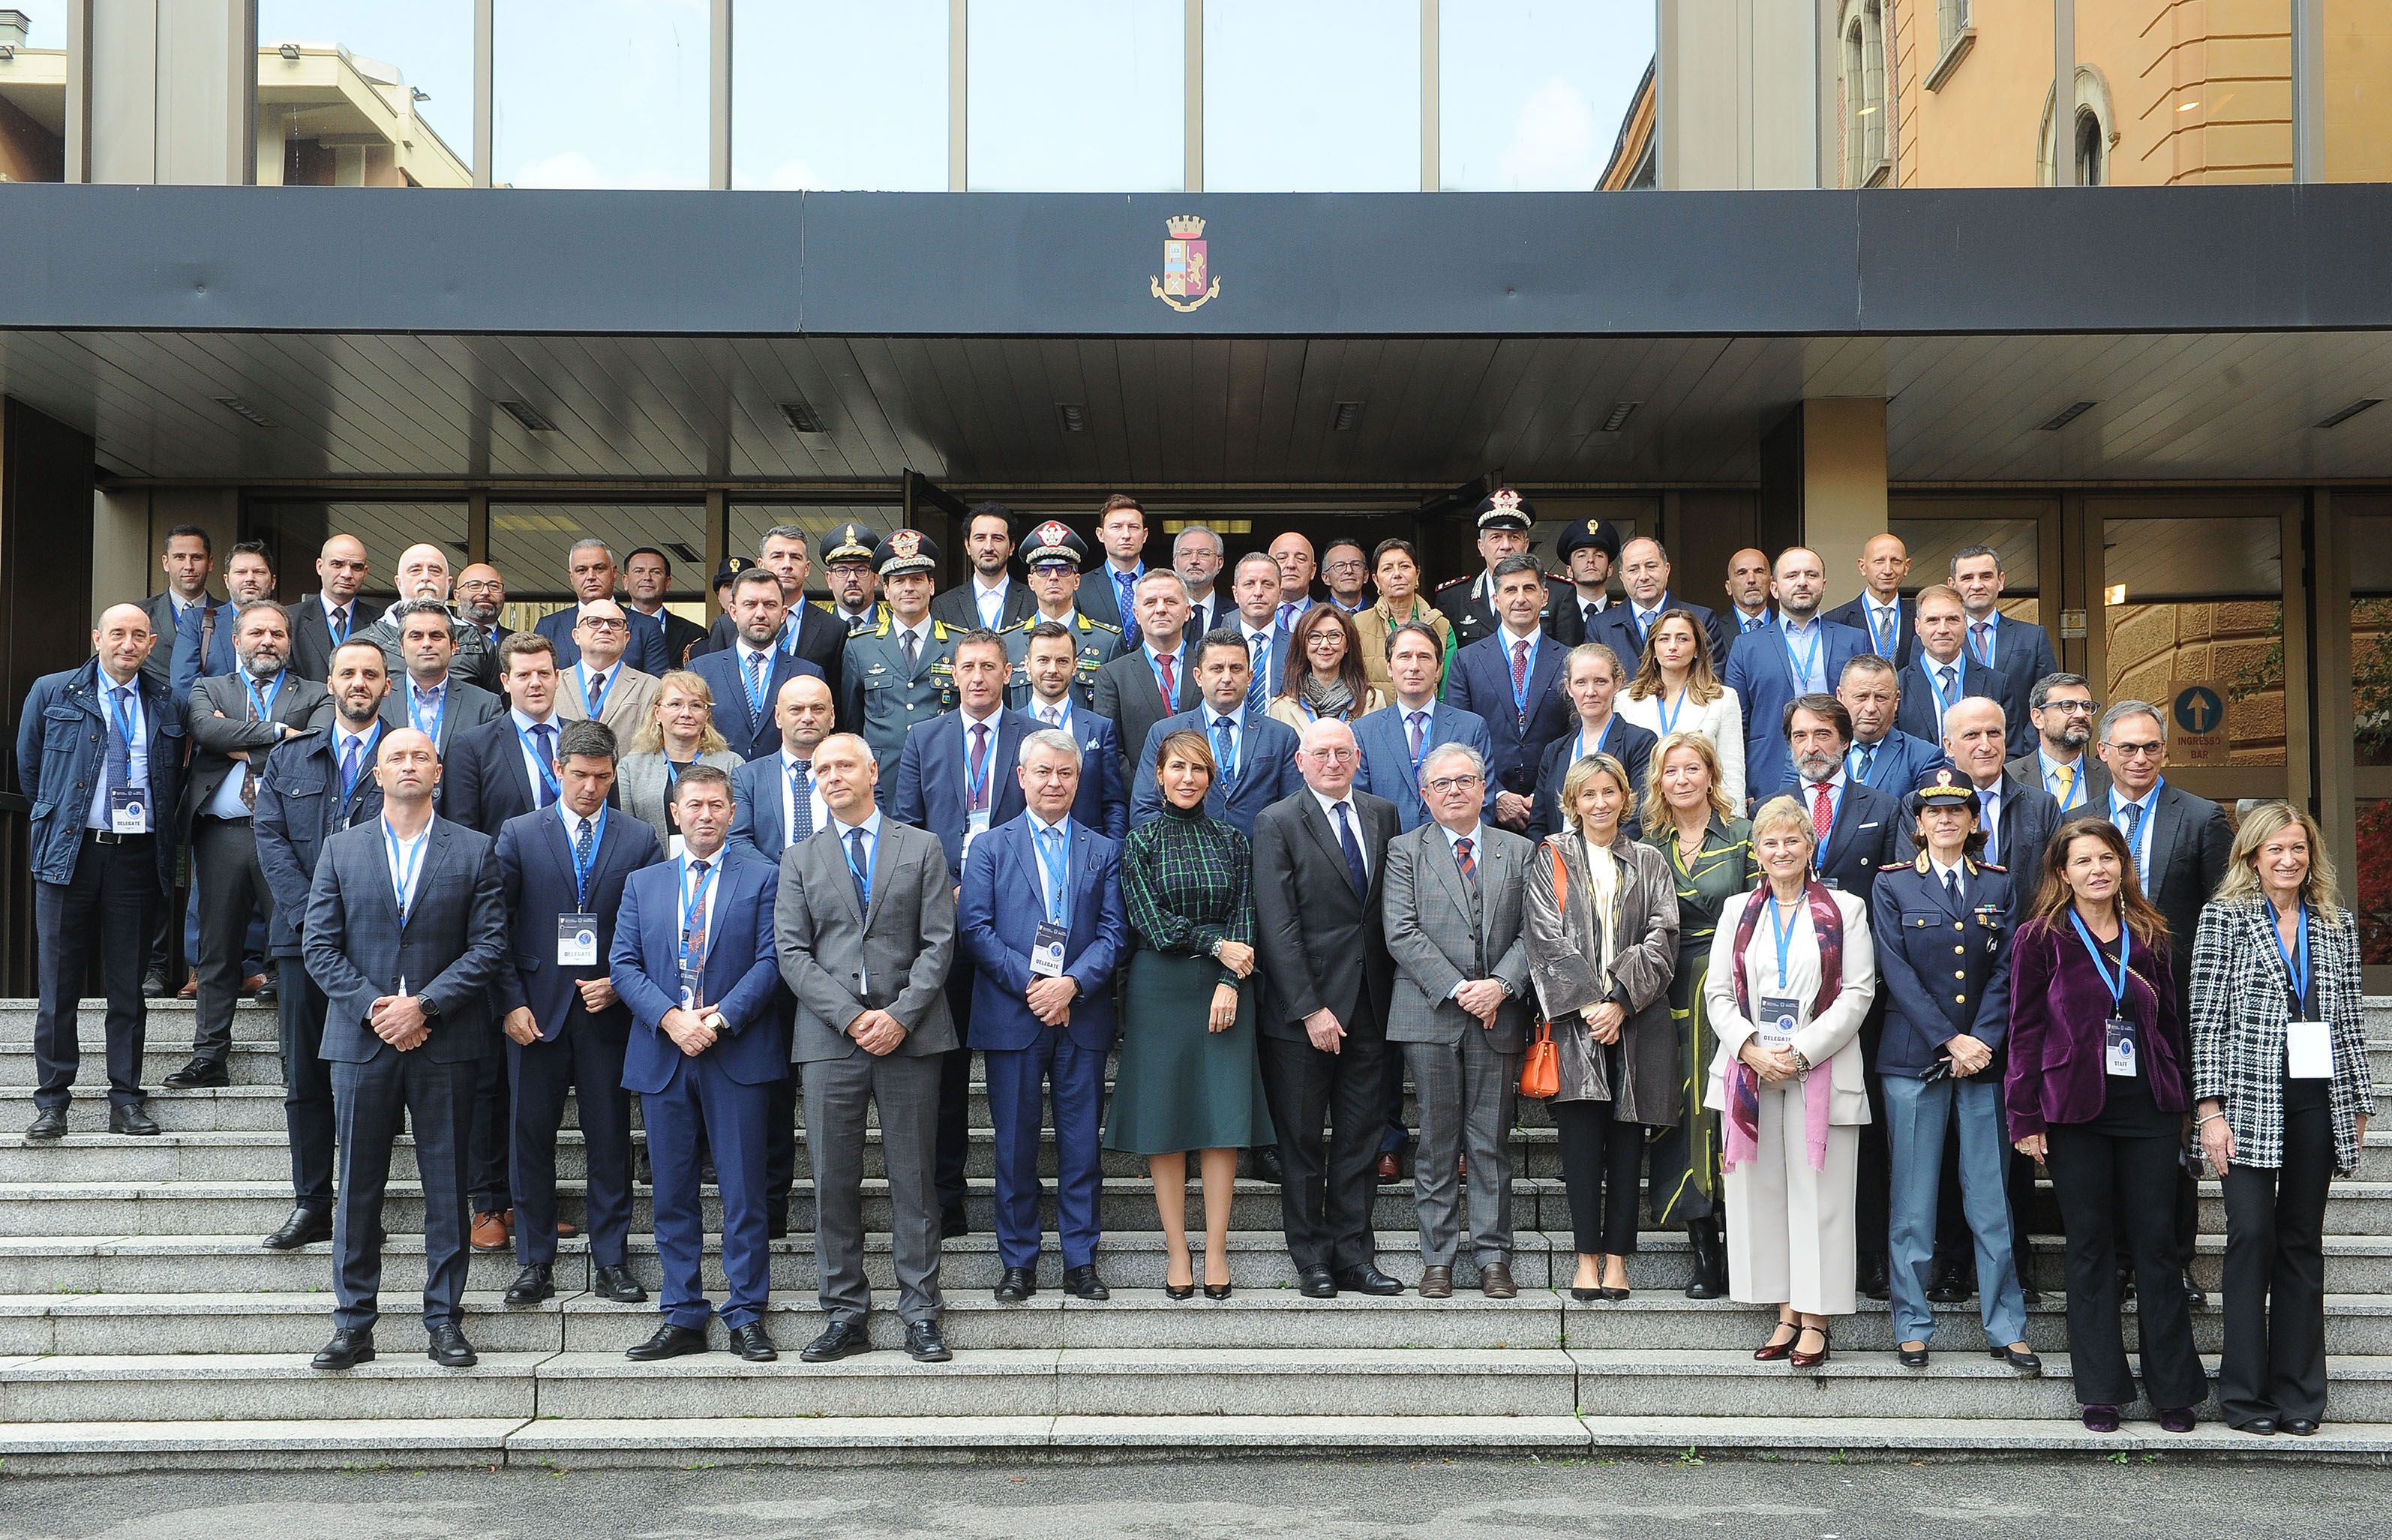 7th Annual Jumbo Security Conference organised by the RCC in cooperation with the Italian Ministry of Interior and the Ministry of Foreign Affairs and International Cooperation and held 17-18 November 2022 (Photo: RCC/Mario Sayadi)